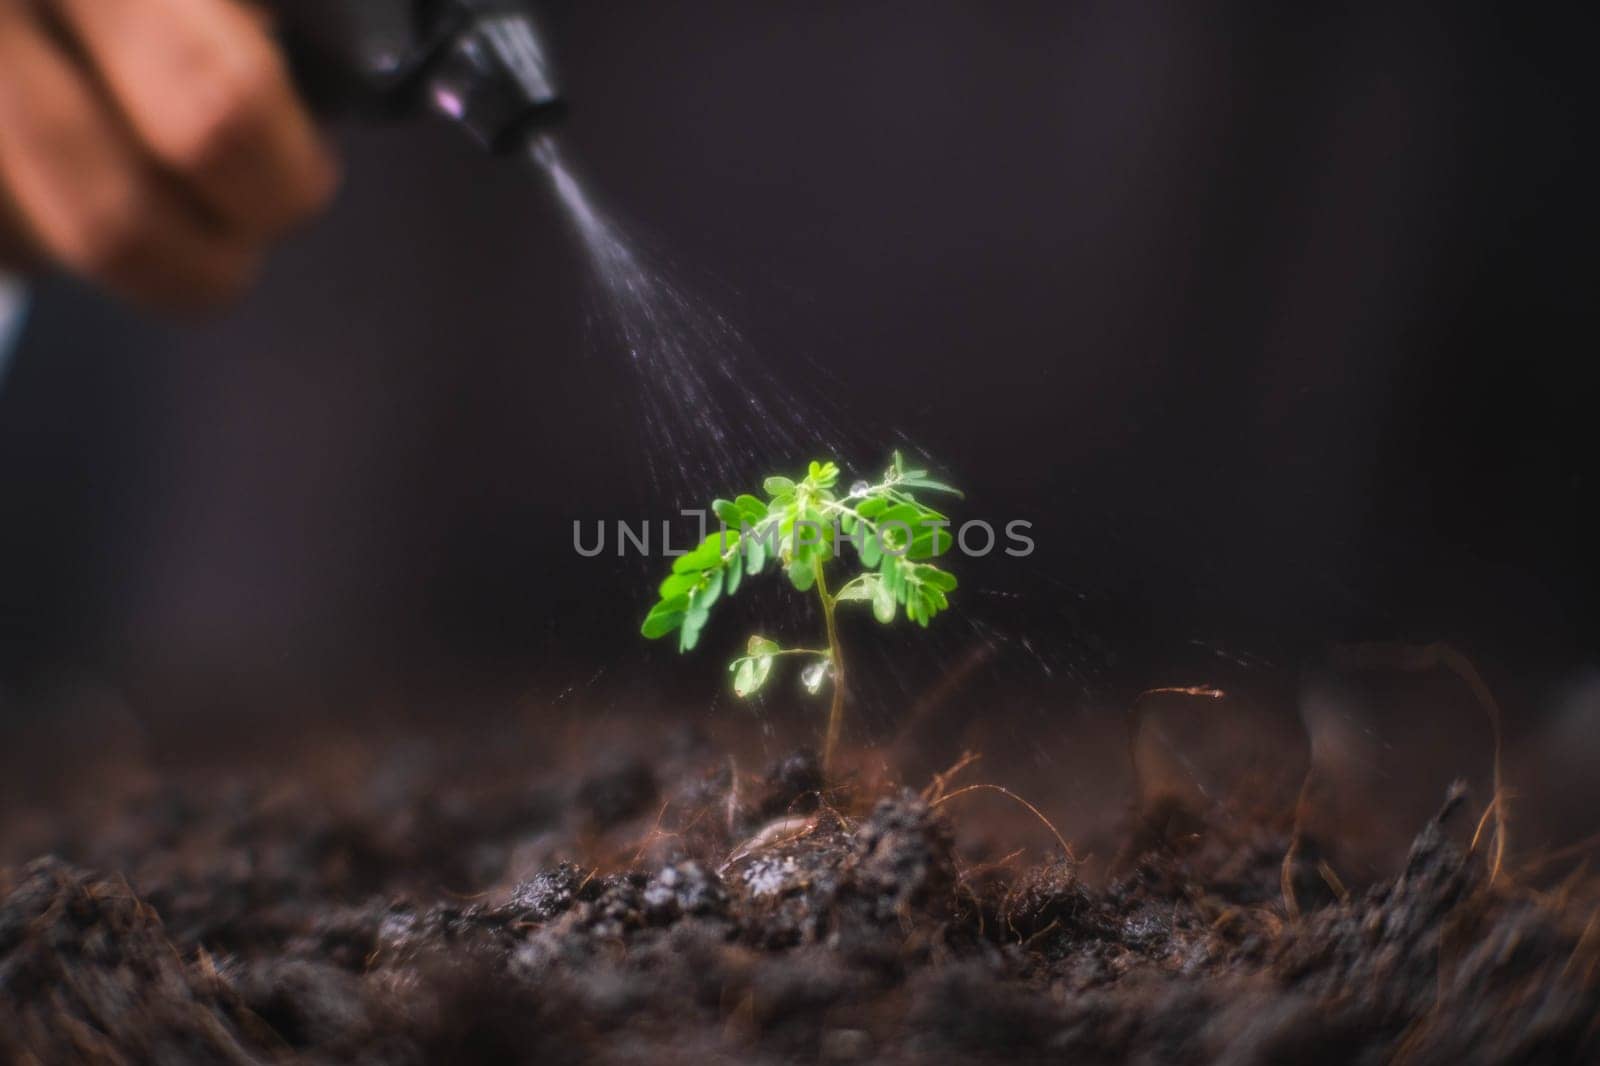 Hand watering plants that grow on the ground. New life care, watering young plants on black background. The concept of planting trees and saving the world.